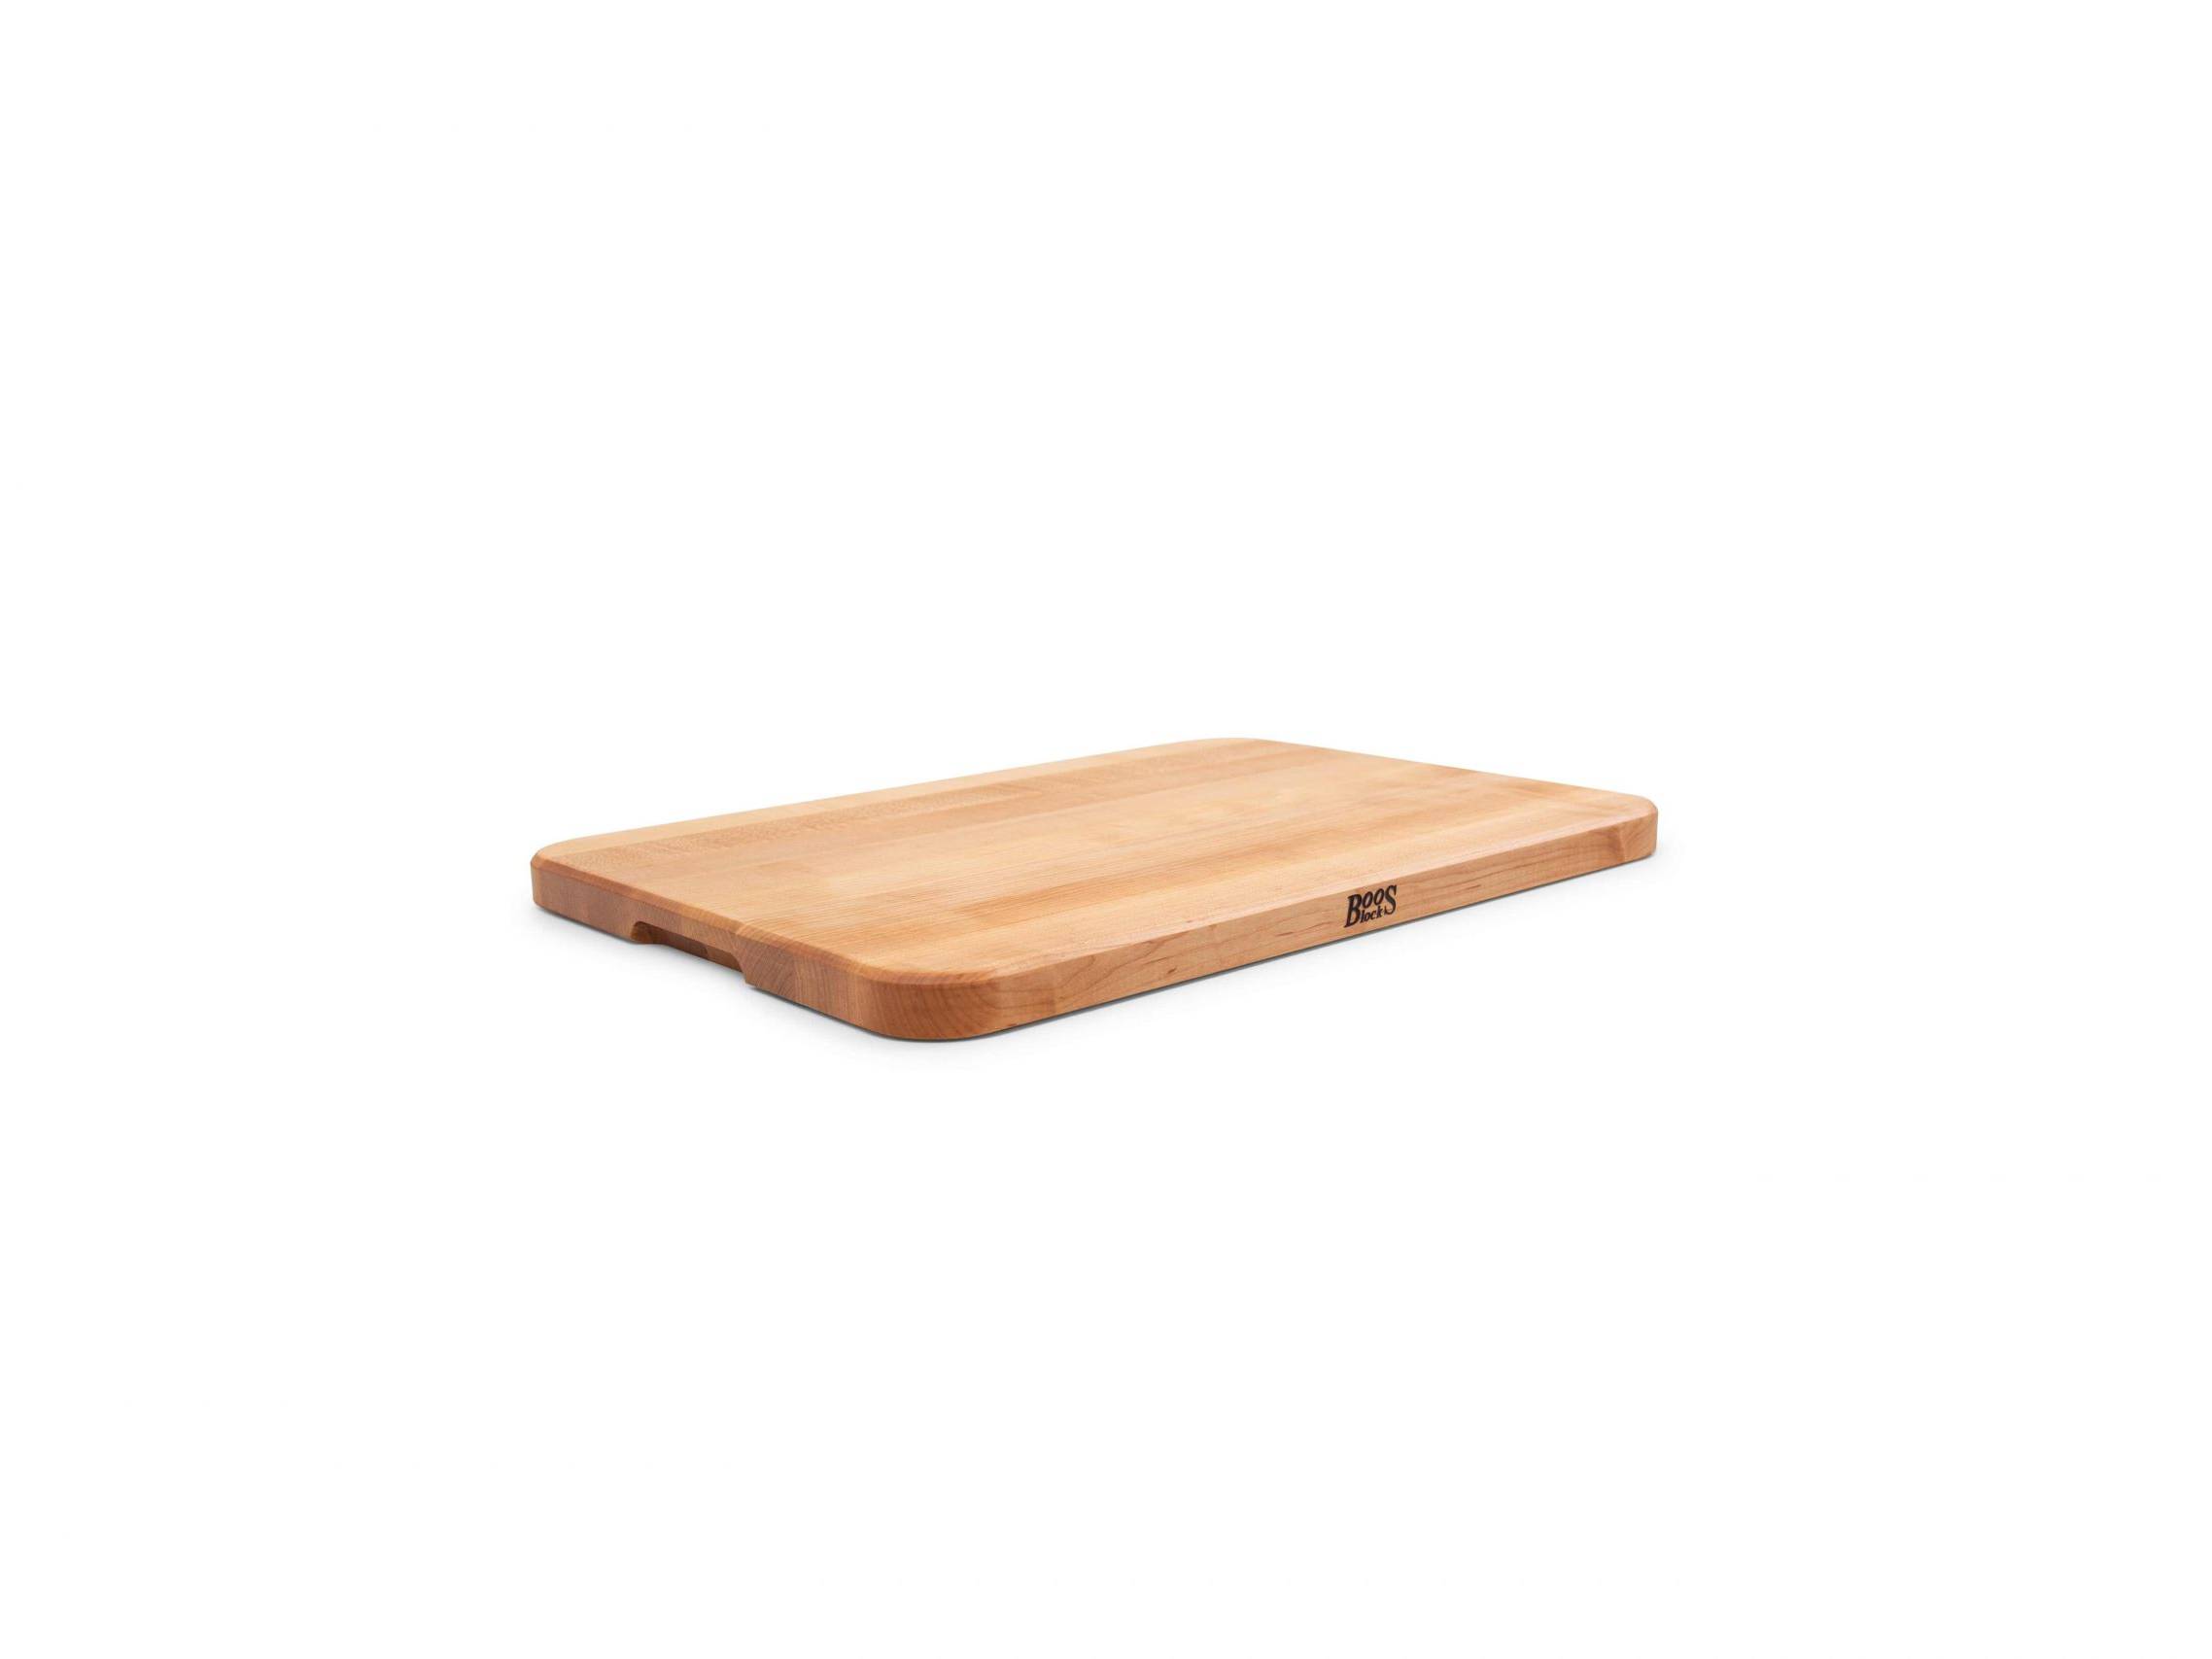 Chop-N-Serve Hard Maple Cutting Board with Recessed Handles; Can Be Used on Both Sides 79